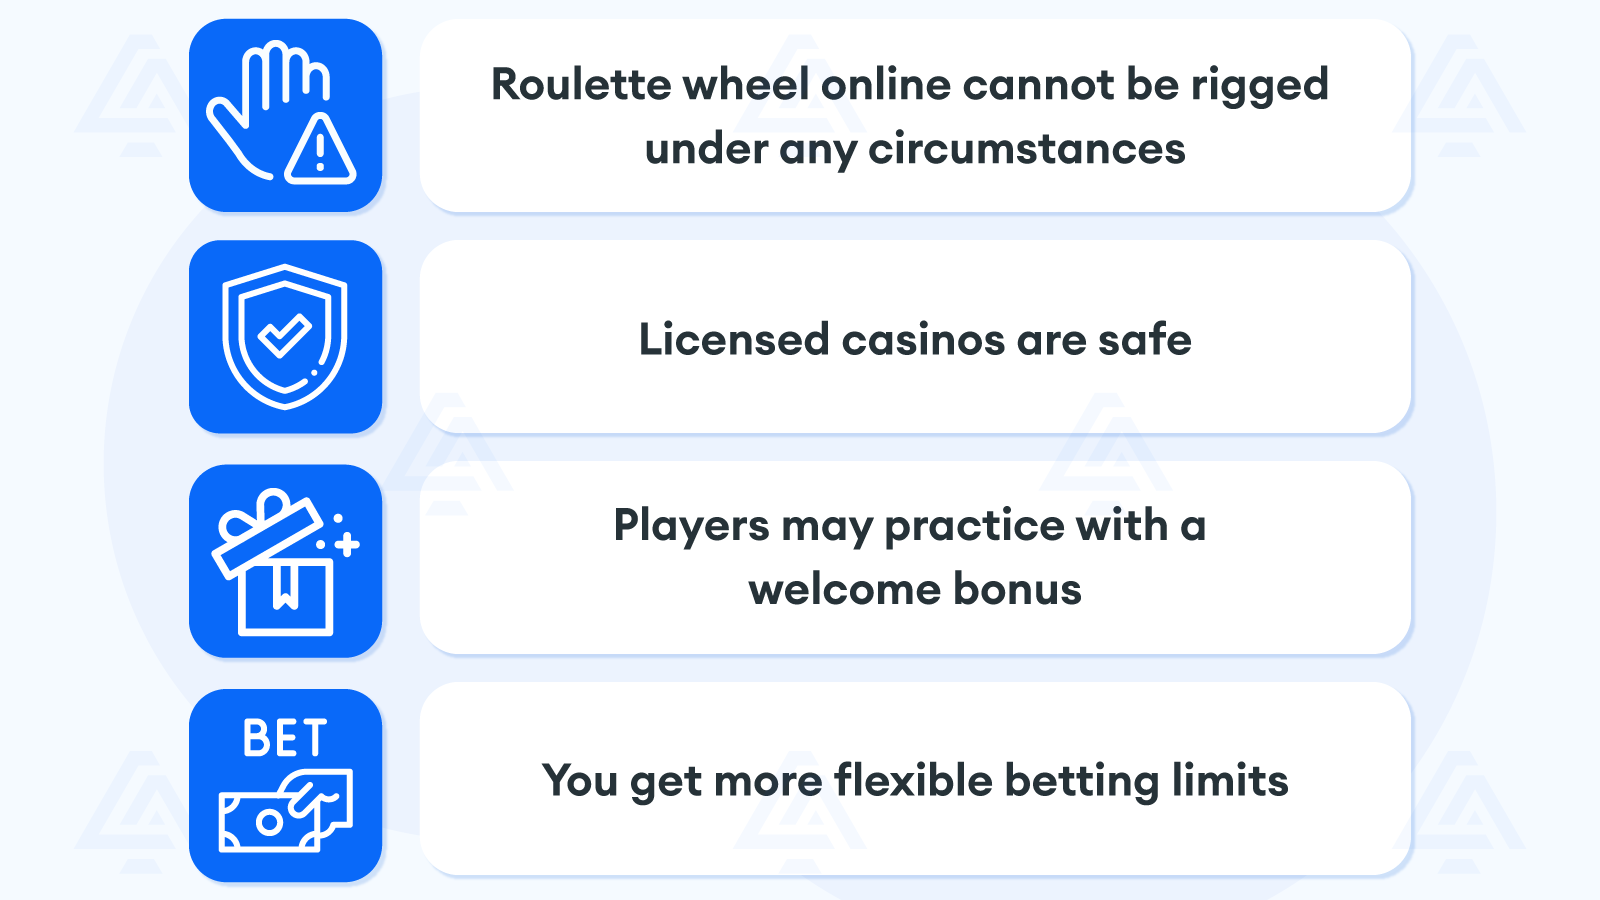 Why play Roulette online - 4 reasons